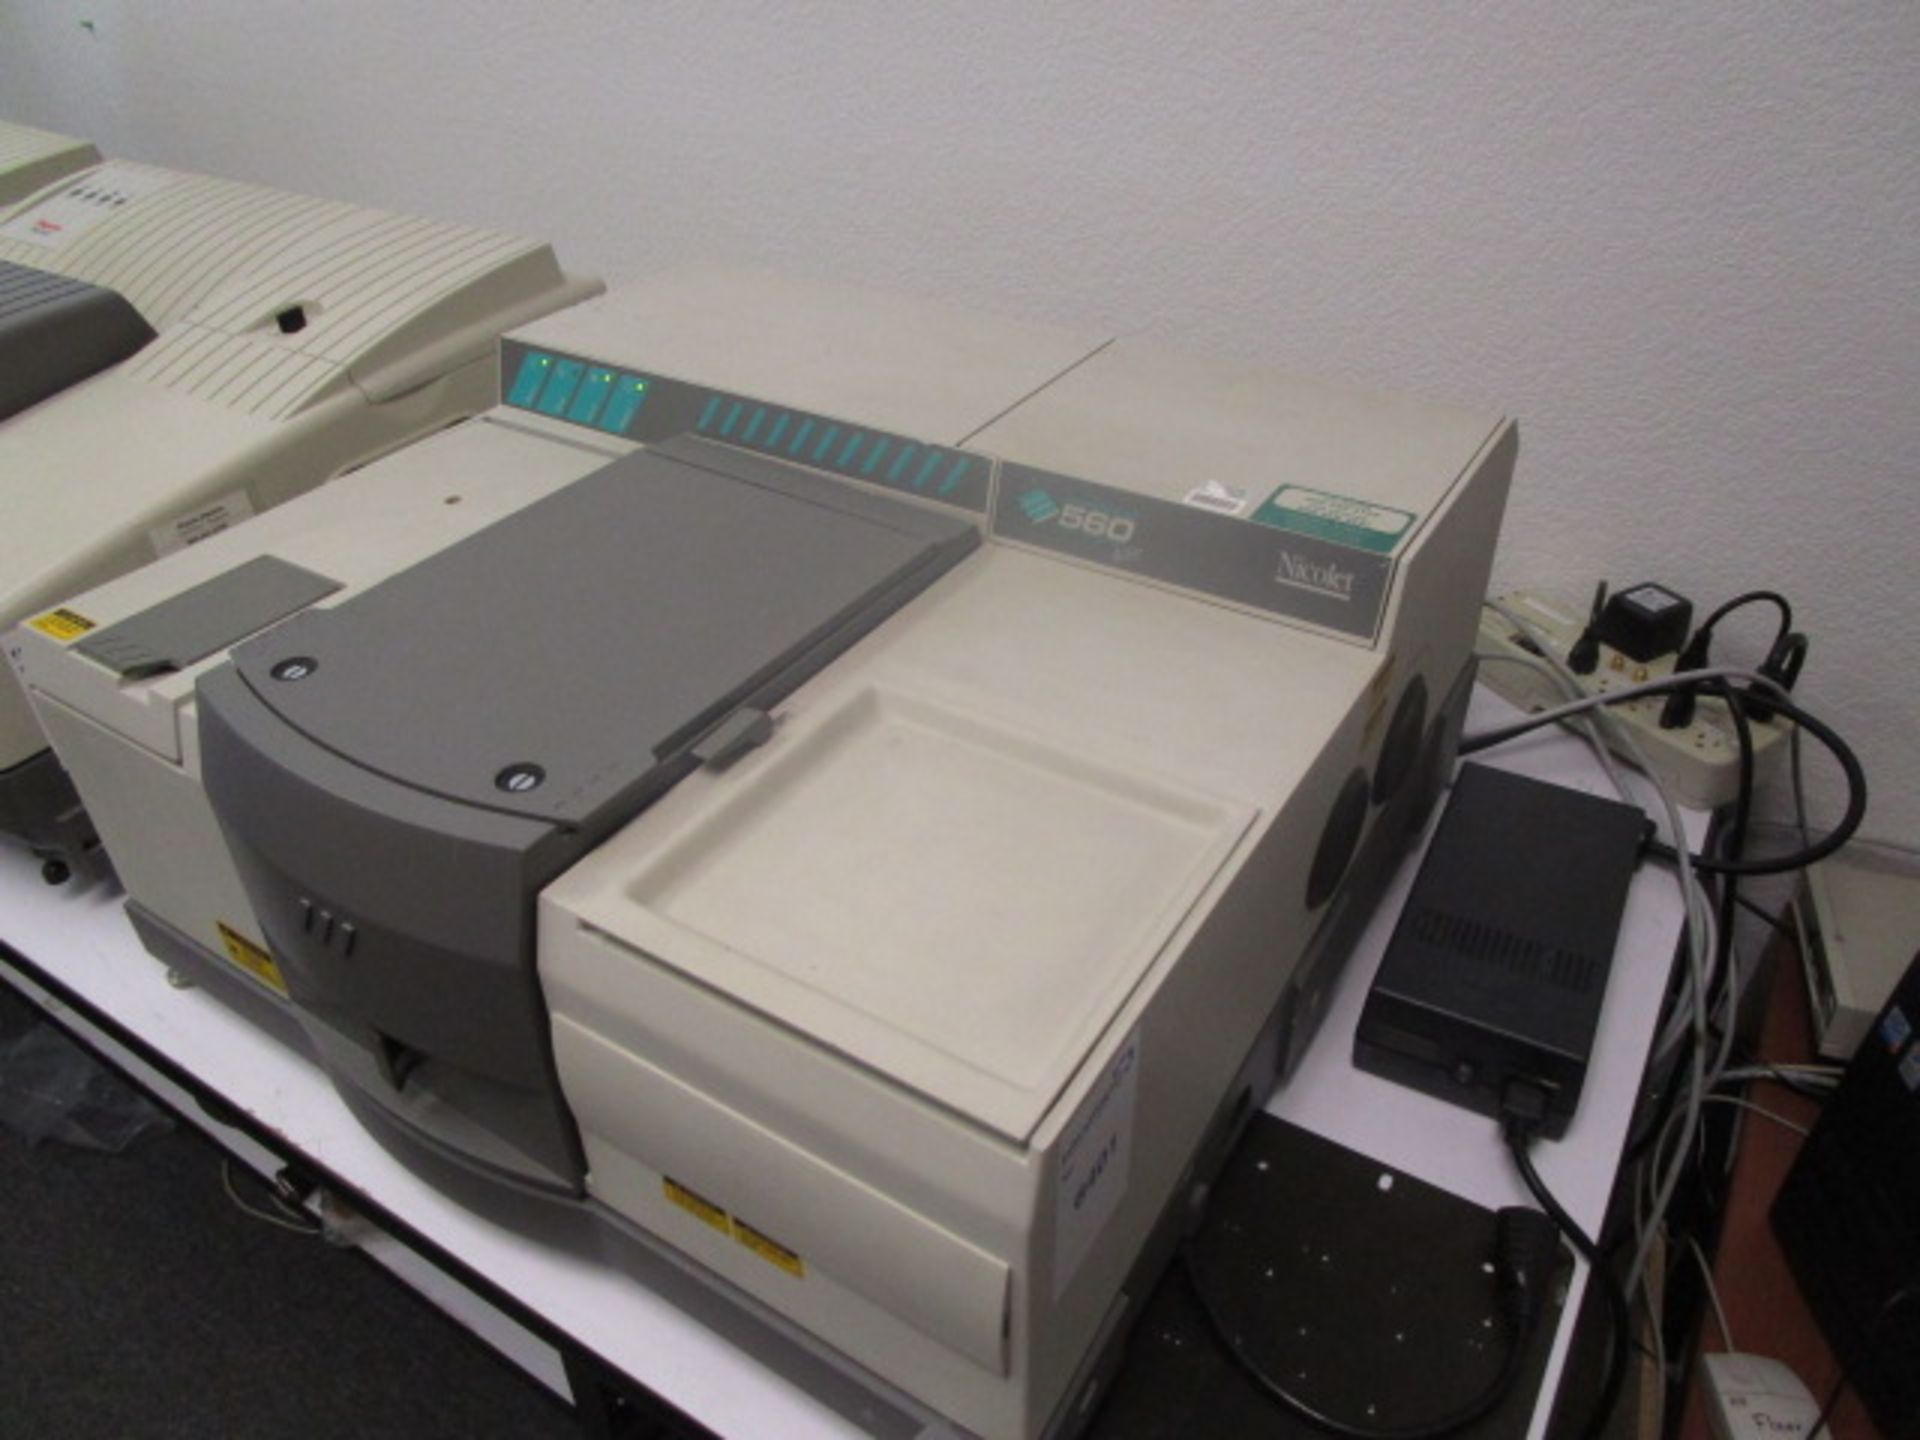 Nicolet Magna- IR 560 Spectromer E.S.P. to include software tutorial, and "32 bit" SW. Near and - Image 20 of 31